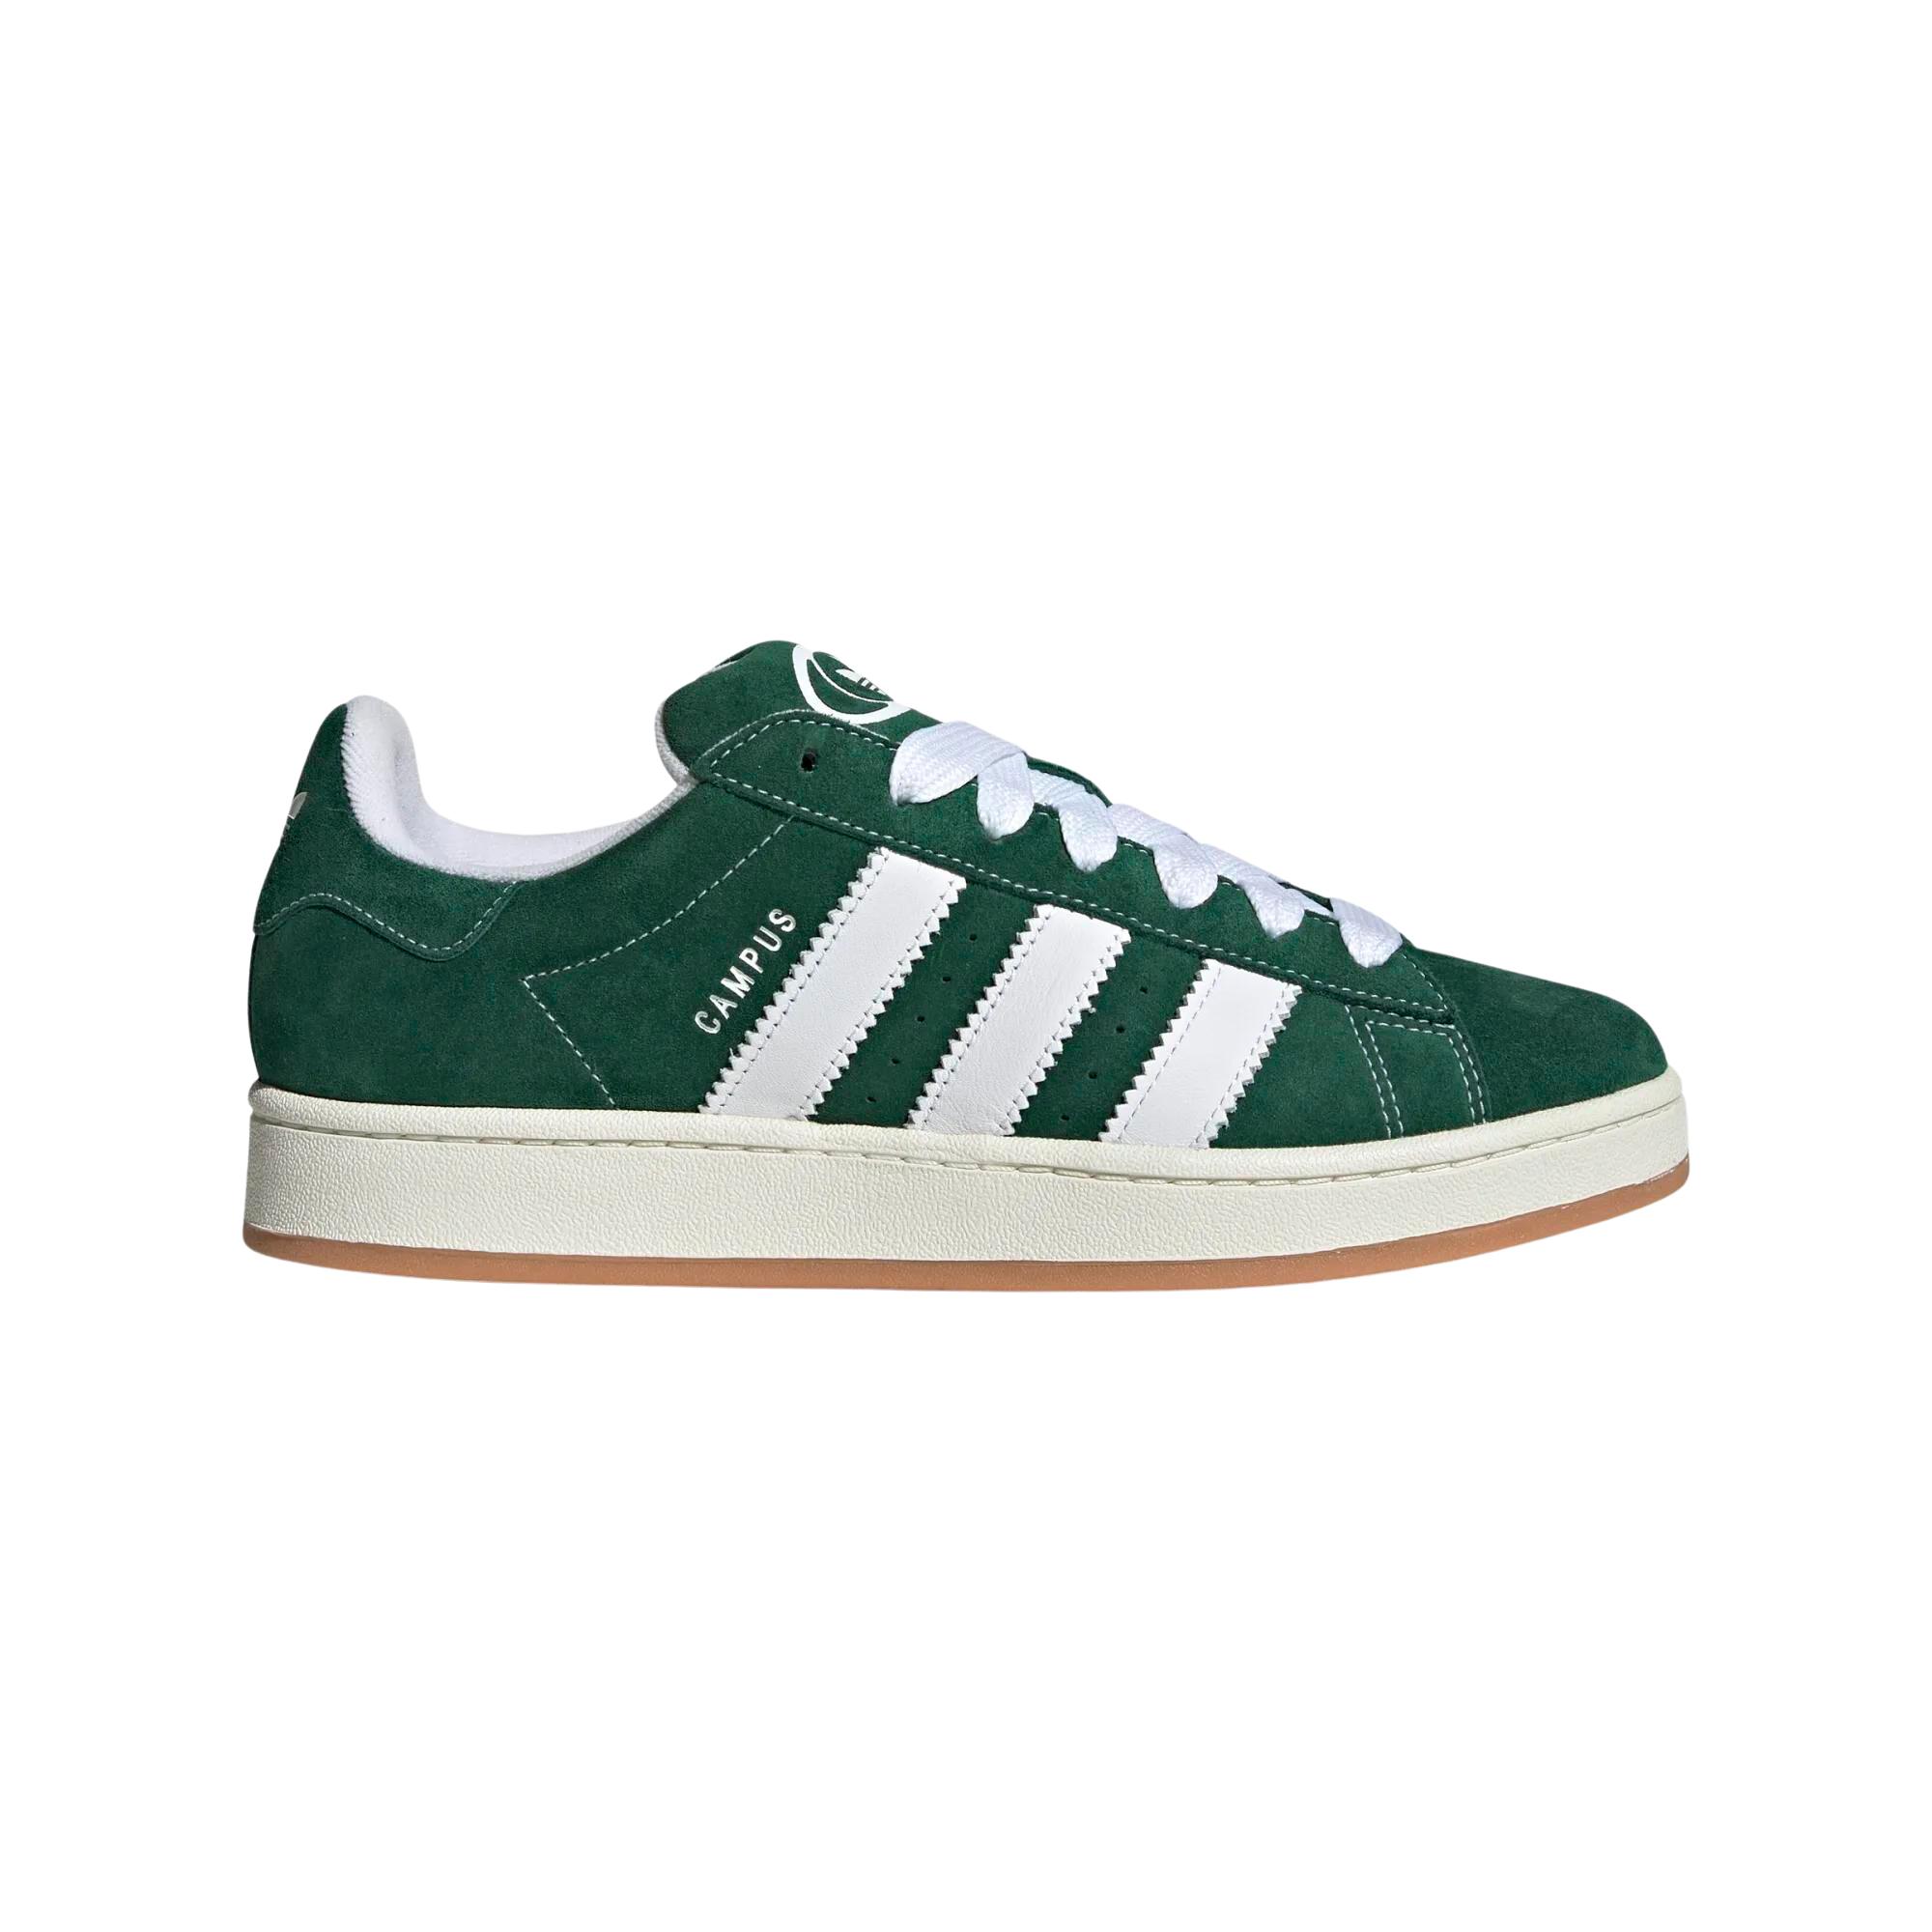 adidas Campus Shoes in Green | Lyst